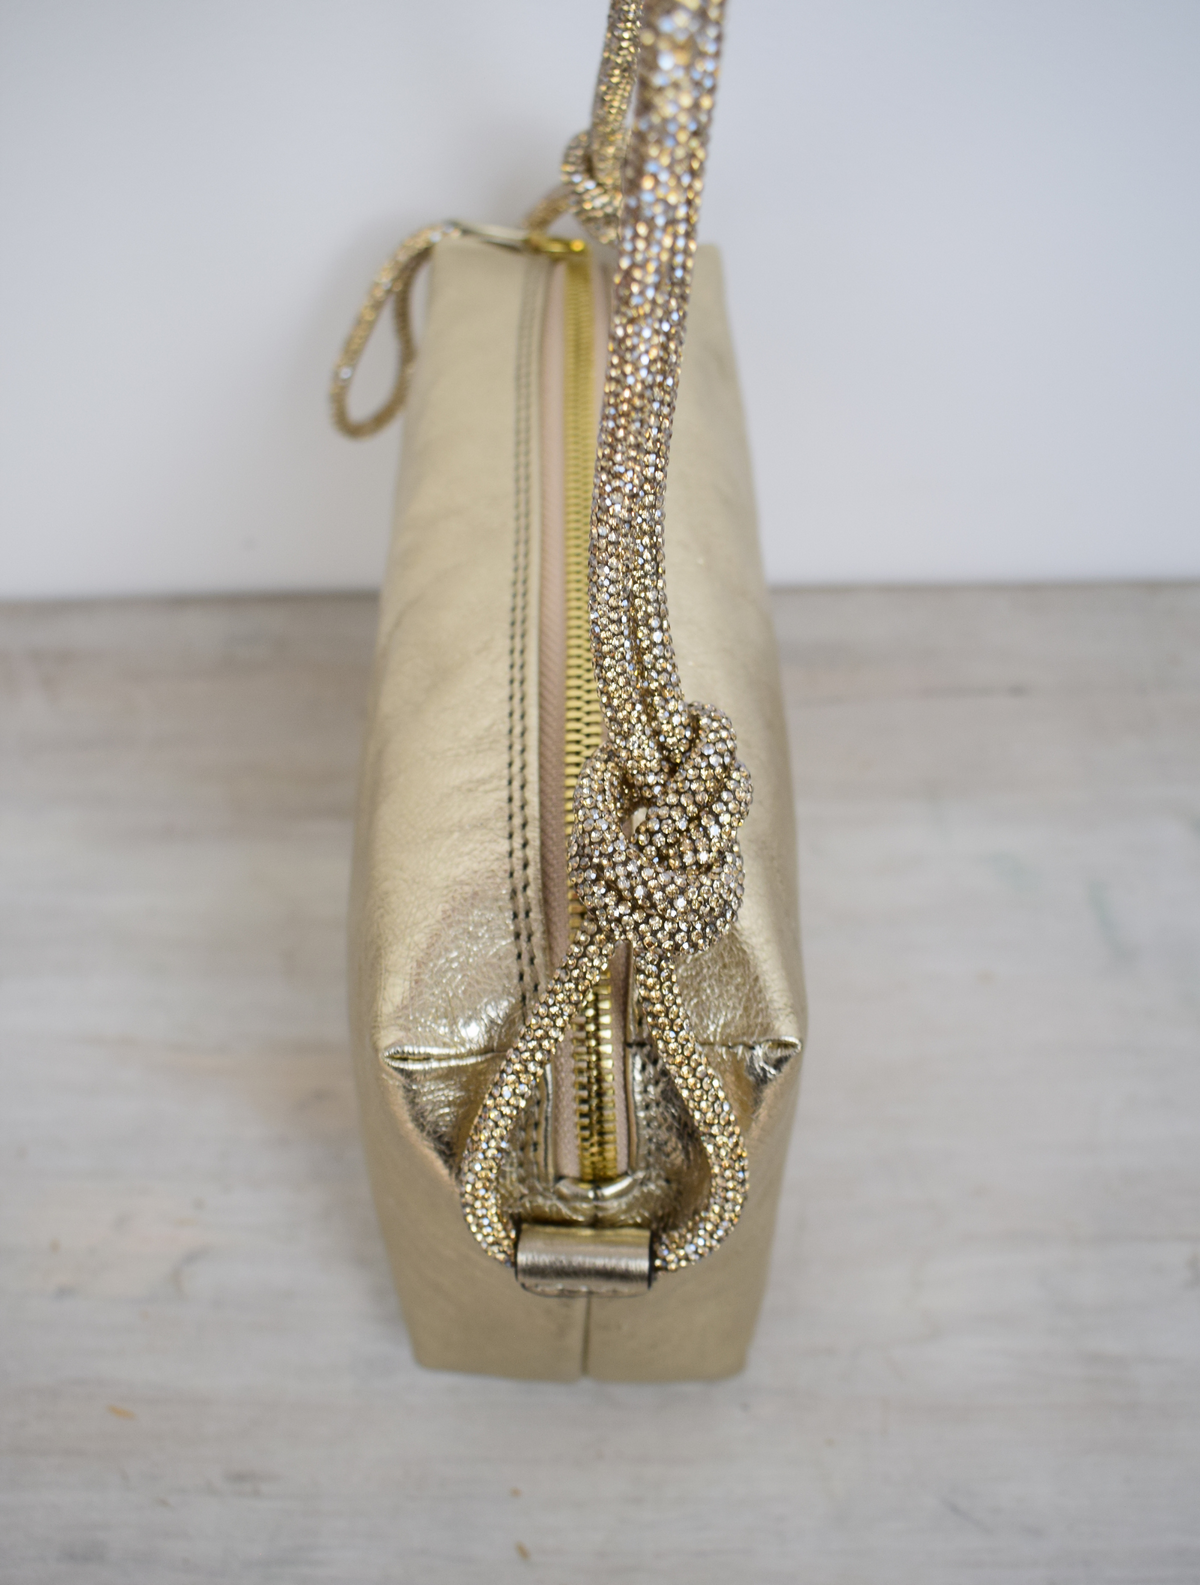 rectangular gold coloured leather bag with sparkly knotted shoulder strap